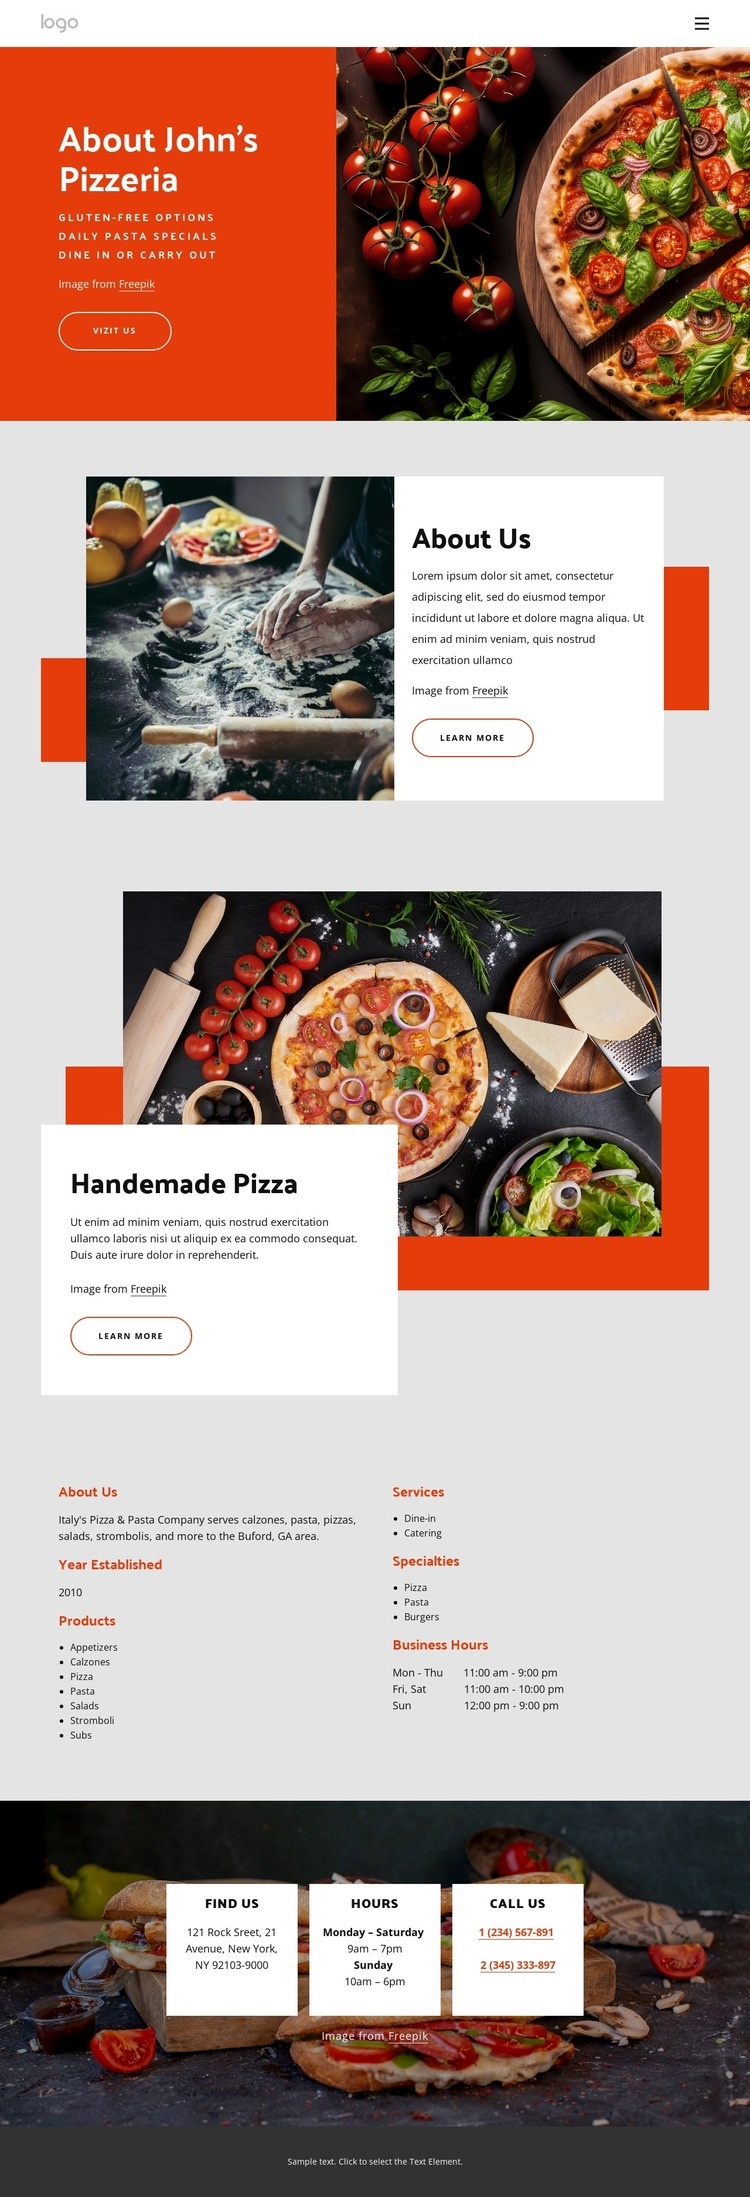 About our pizzeria Wysiwyg Editor Html 